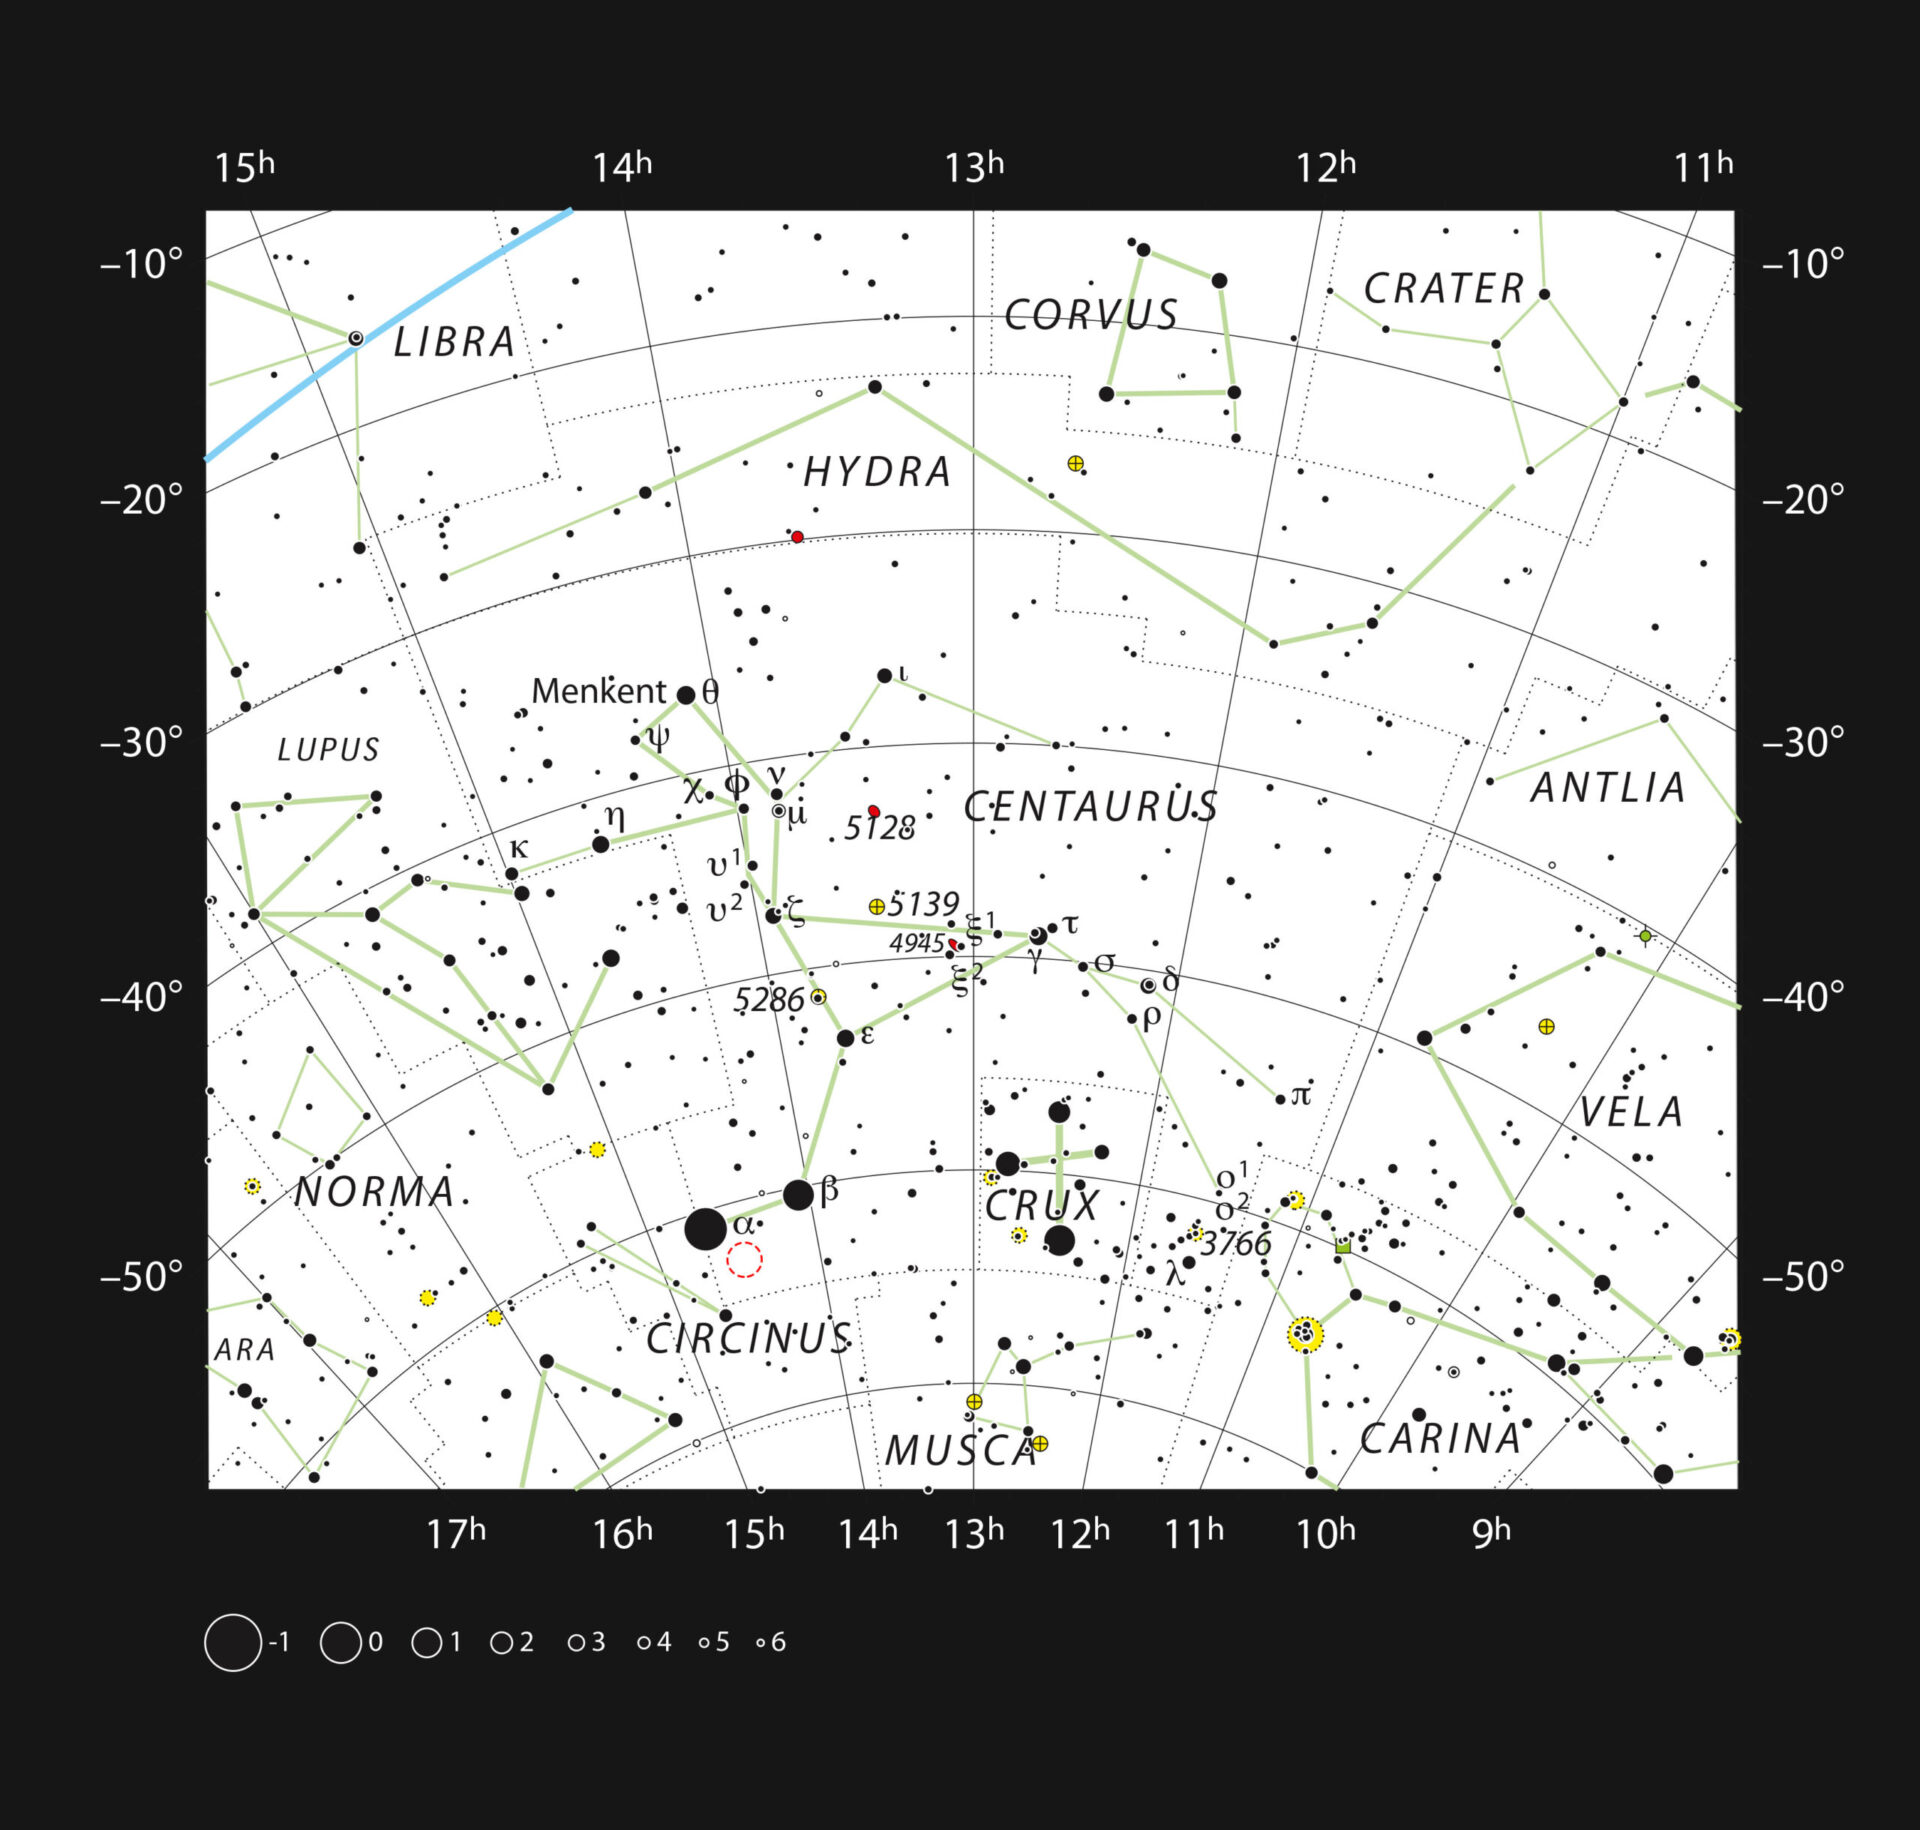 <p>This chart shows the large southern constellation of Centaurus (The Centaur) and shows most of the stars visible with the naked eye on a clear dark night. The location of the closest star to the Solar System, Proxima Centauri, is marked with a red circle. Proxima is too faint to see with the unaided eye but can be found using a small telescope. Credit: ESO/IAU and Sky & Telescope</p>
